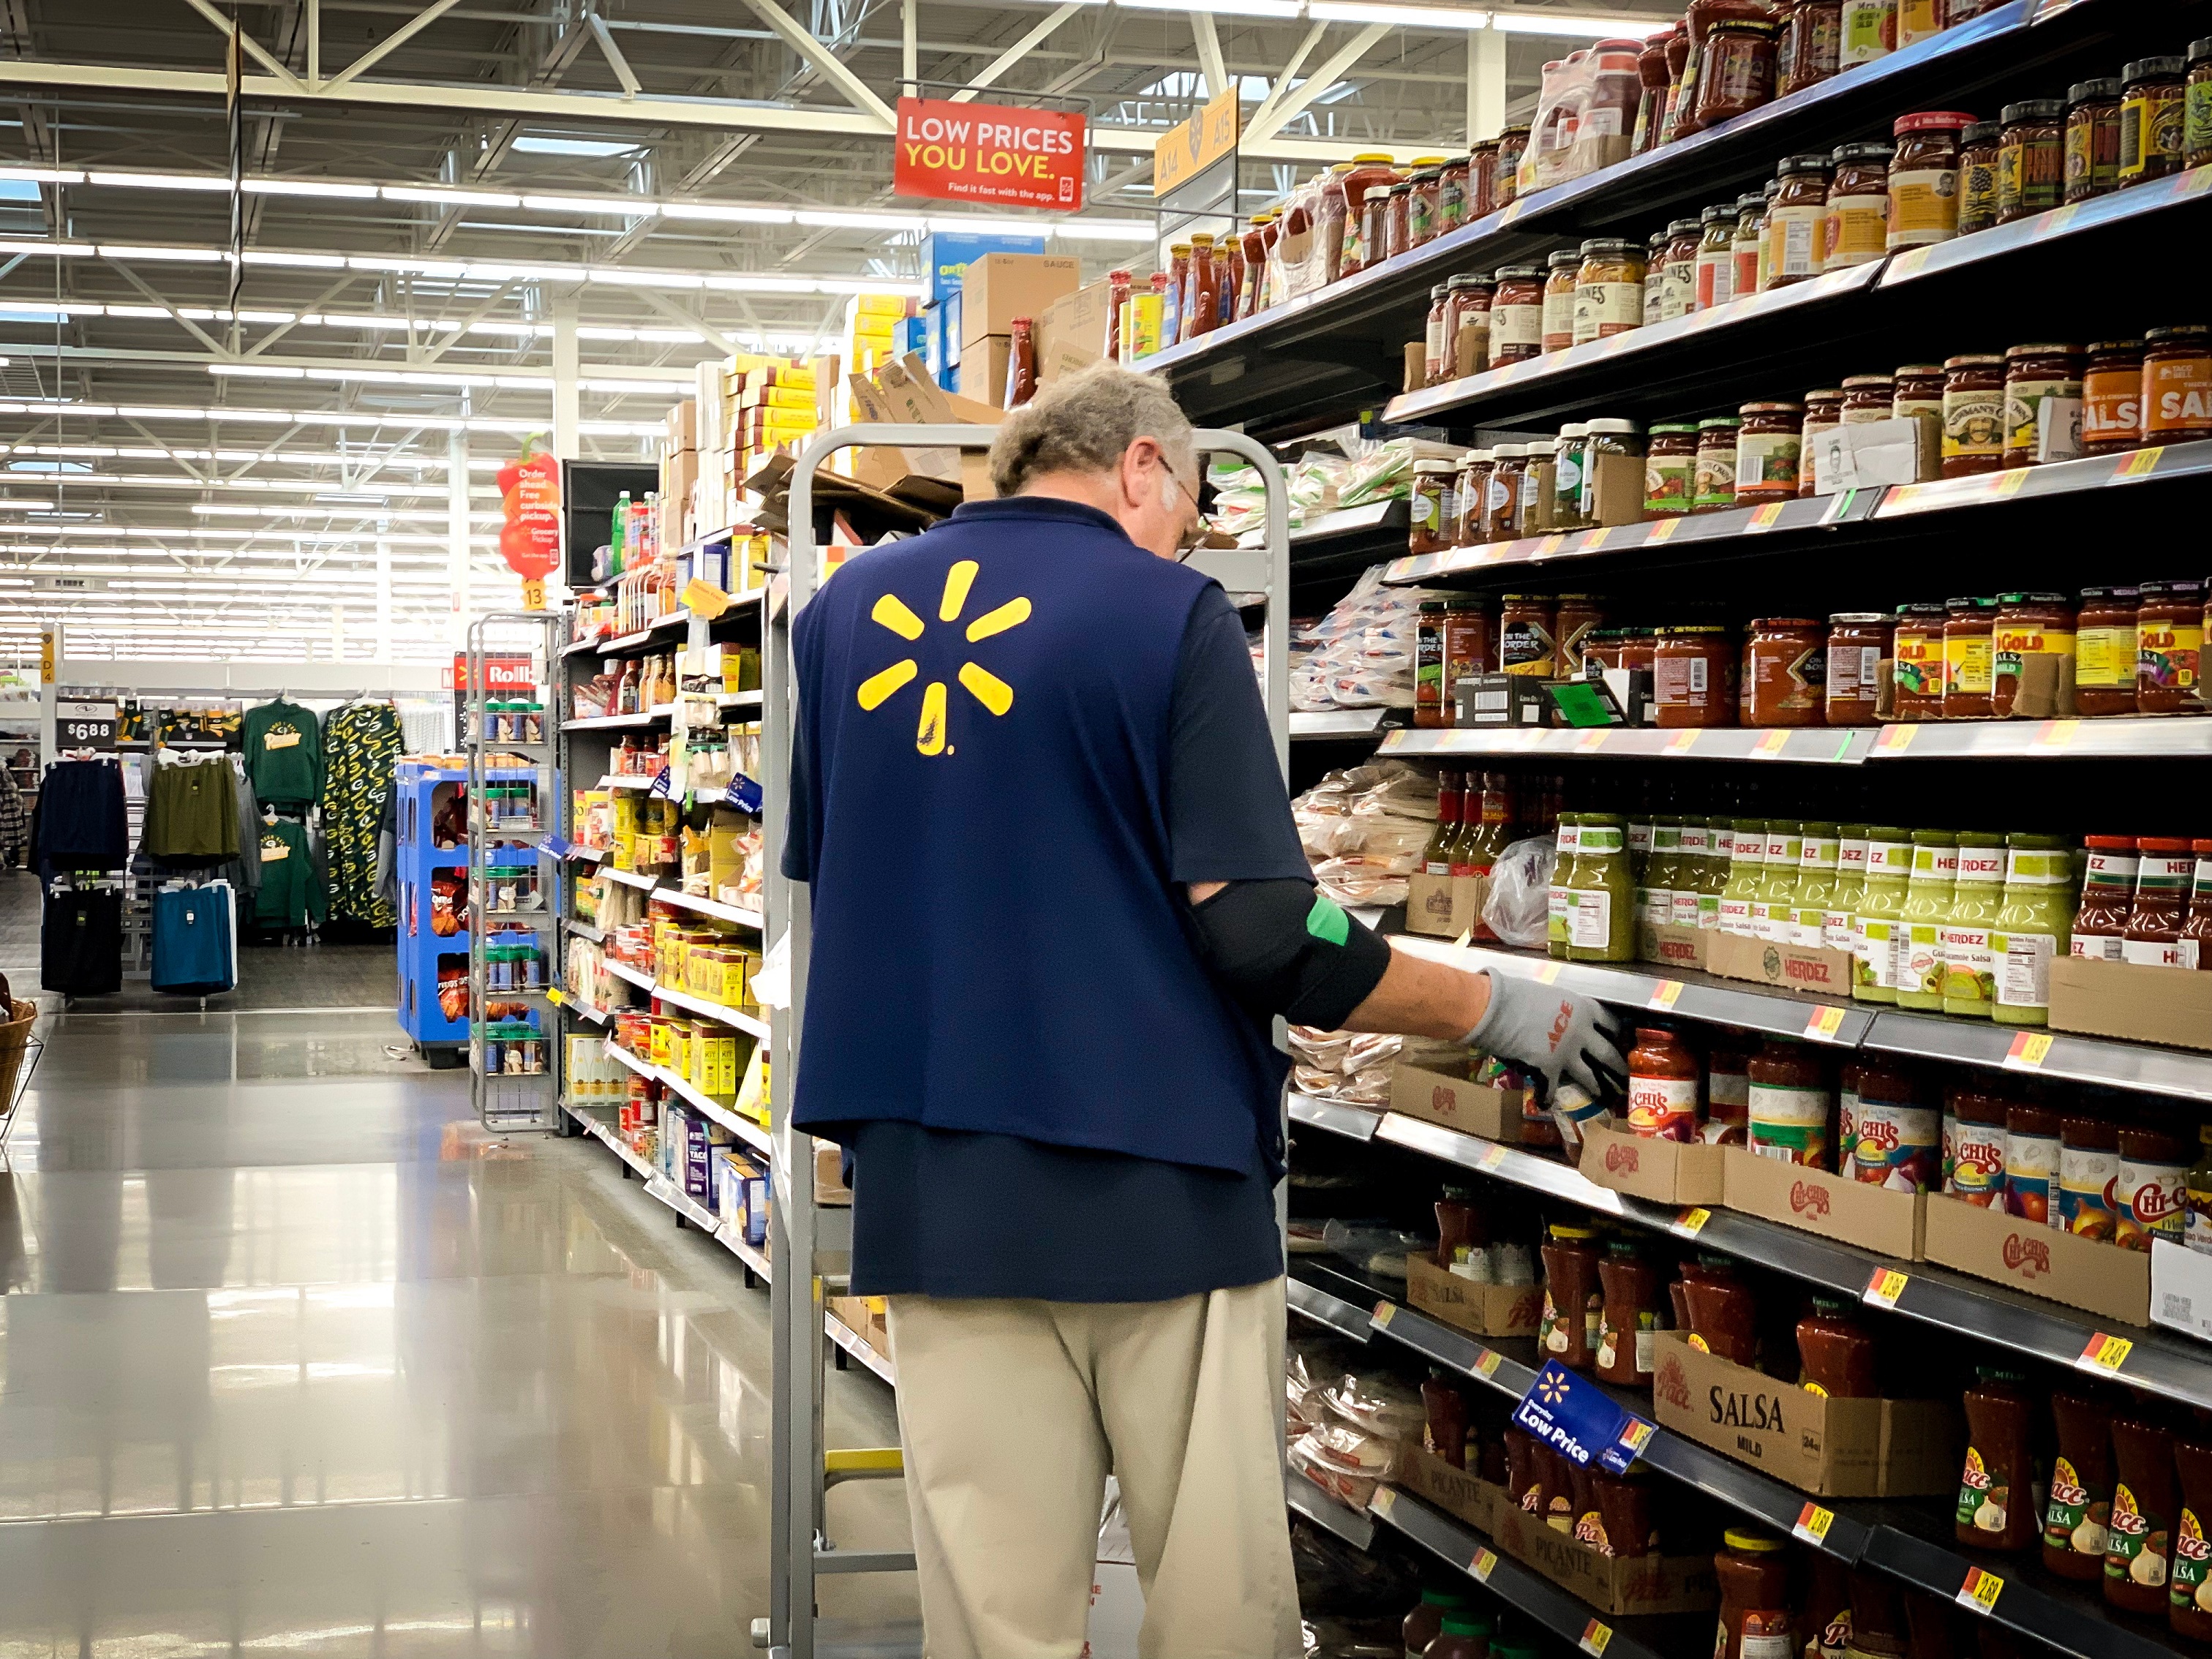 Leave Of Absence Policy At Walmart In 2022 (Full Guide)